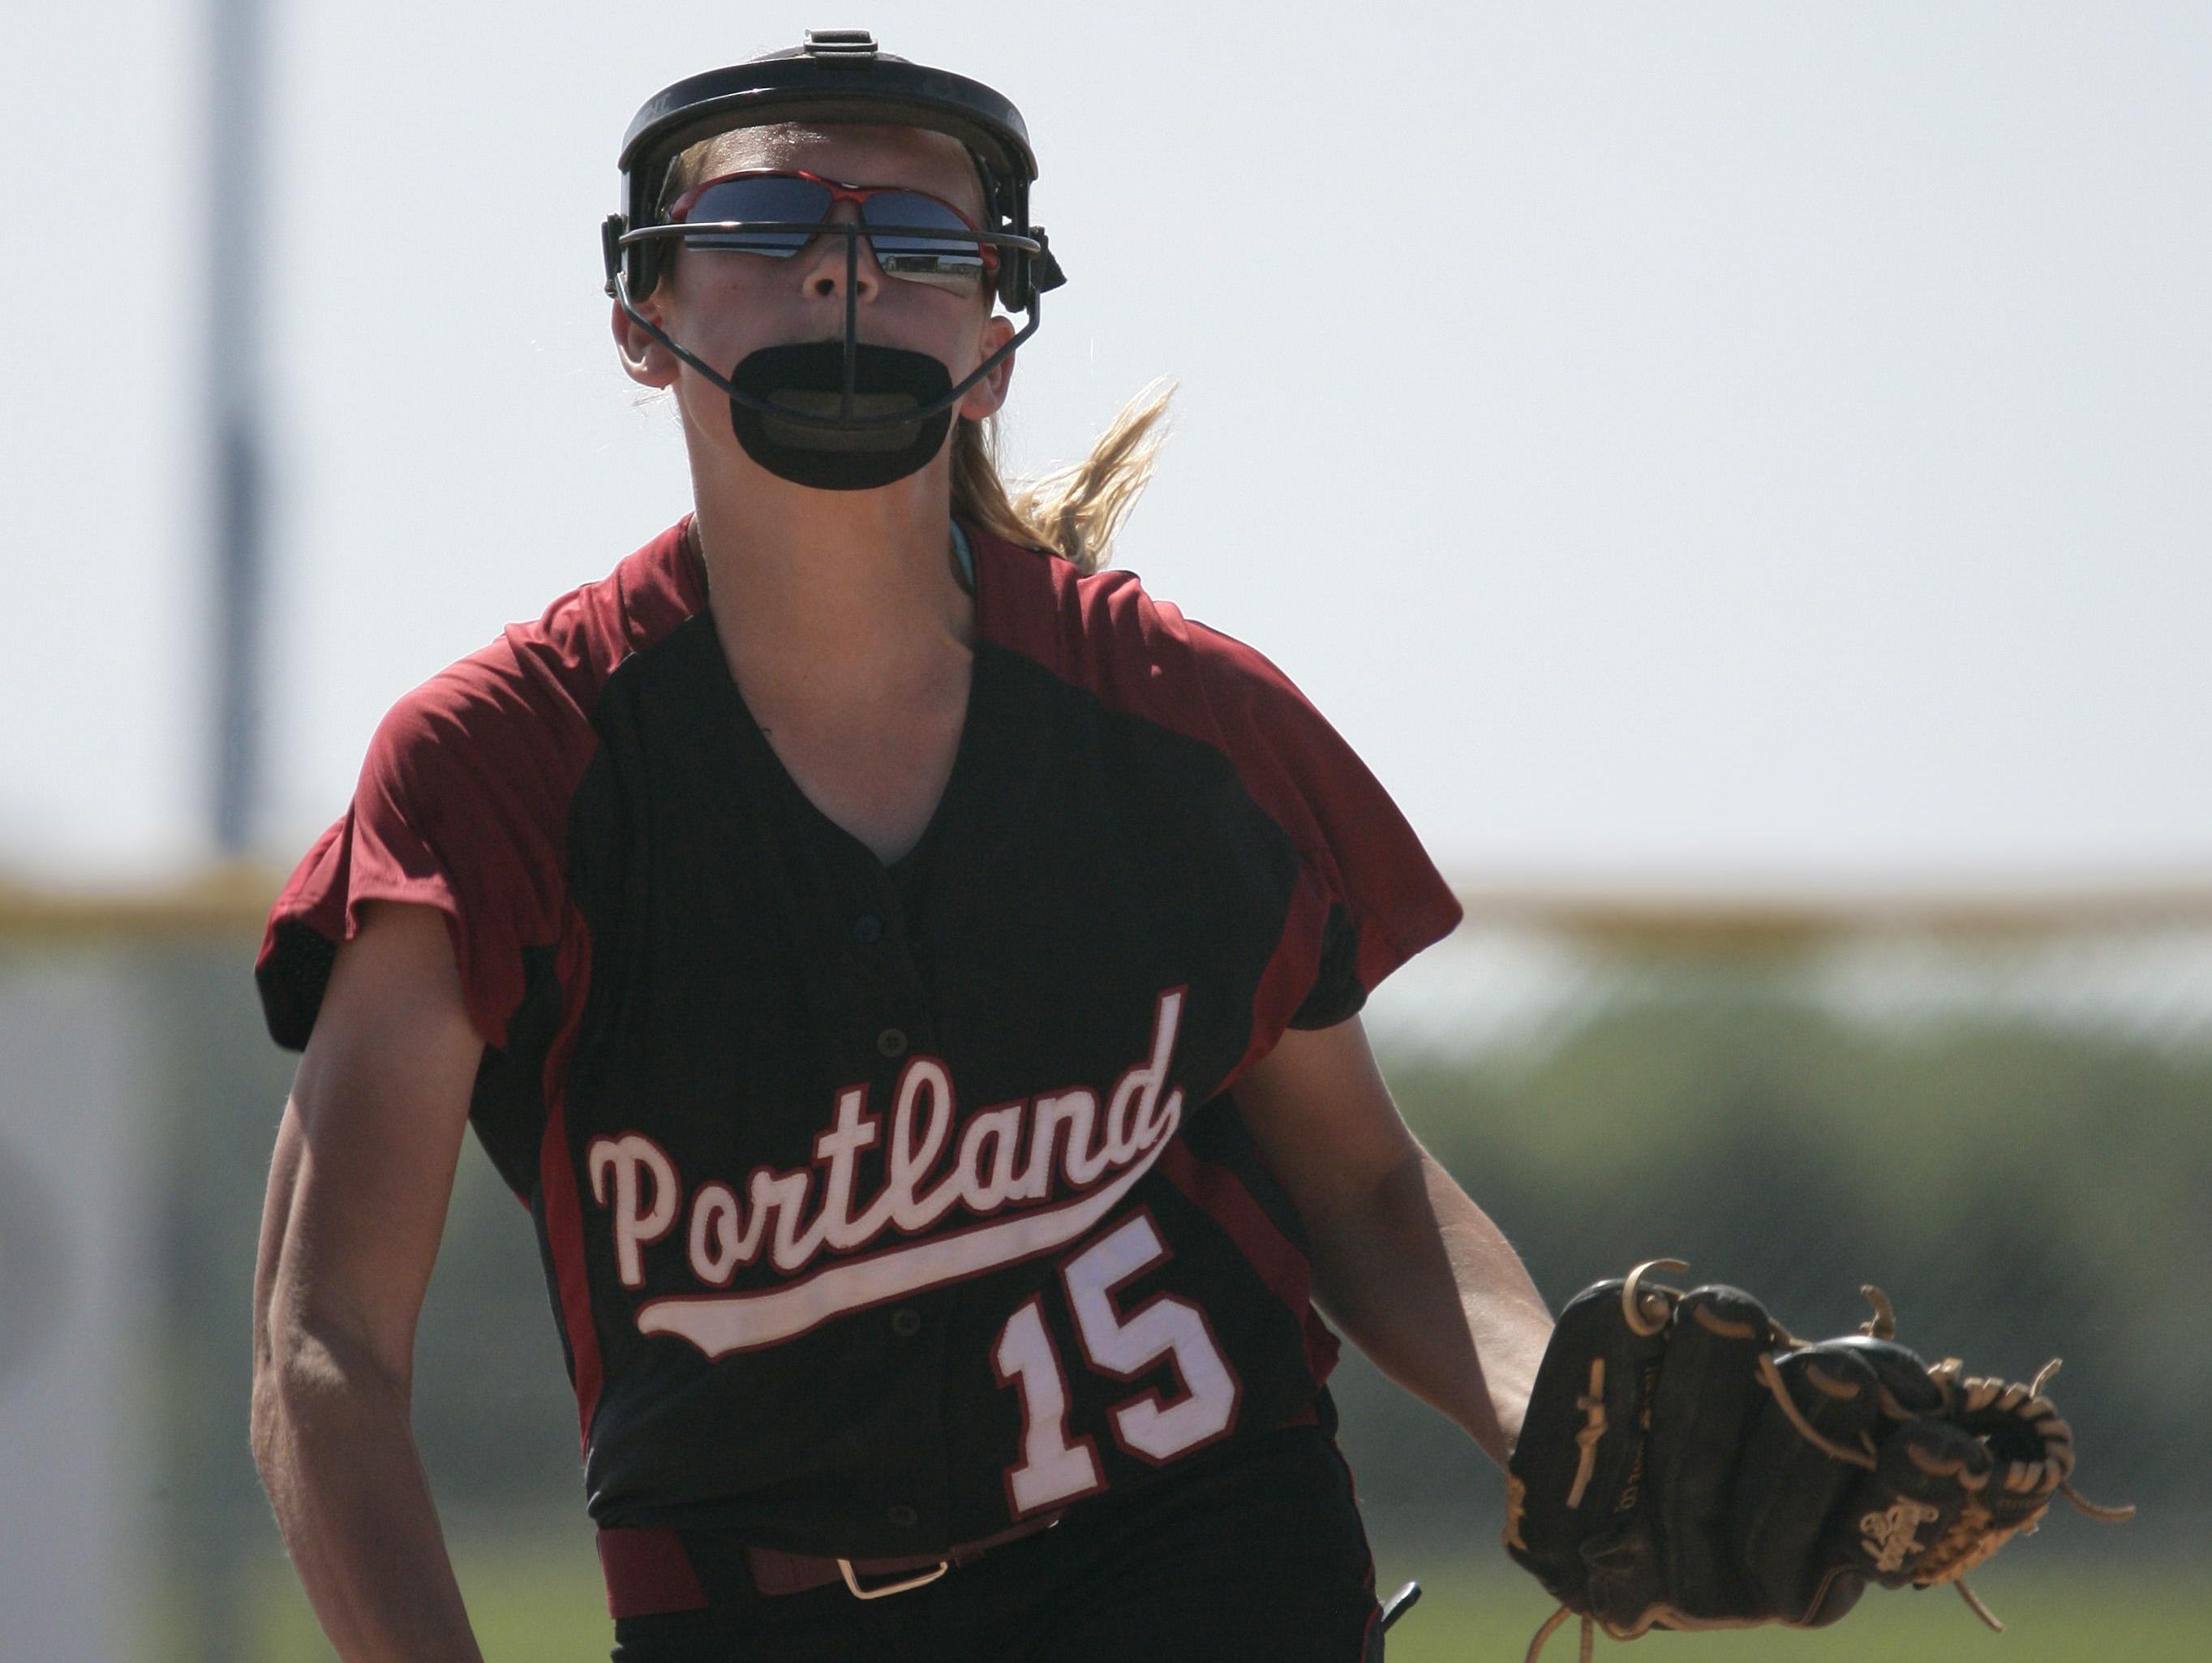 Freshman Abby Grys won 11 games in the circle during the regular season for Portland, which will face Carleton Airport in a Division 2 quarterfinal.